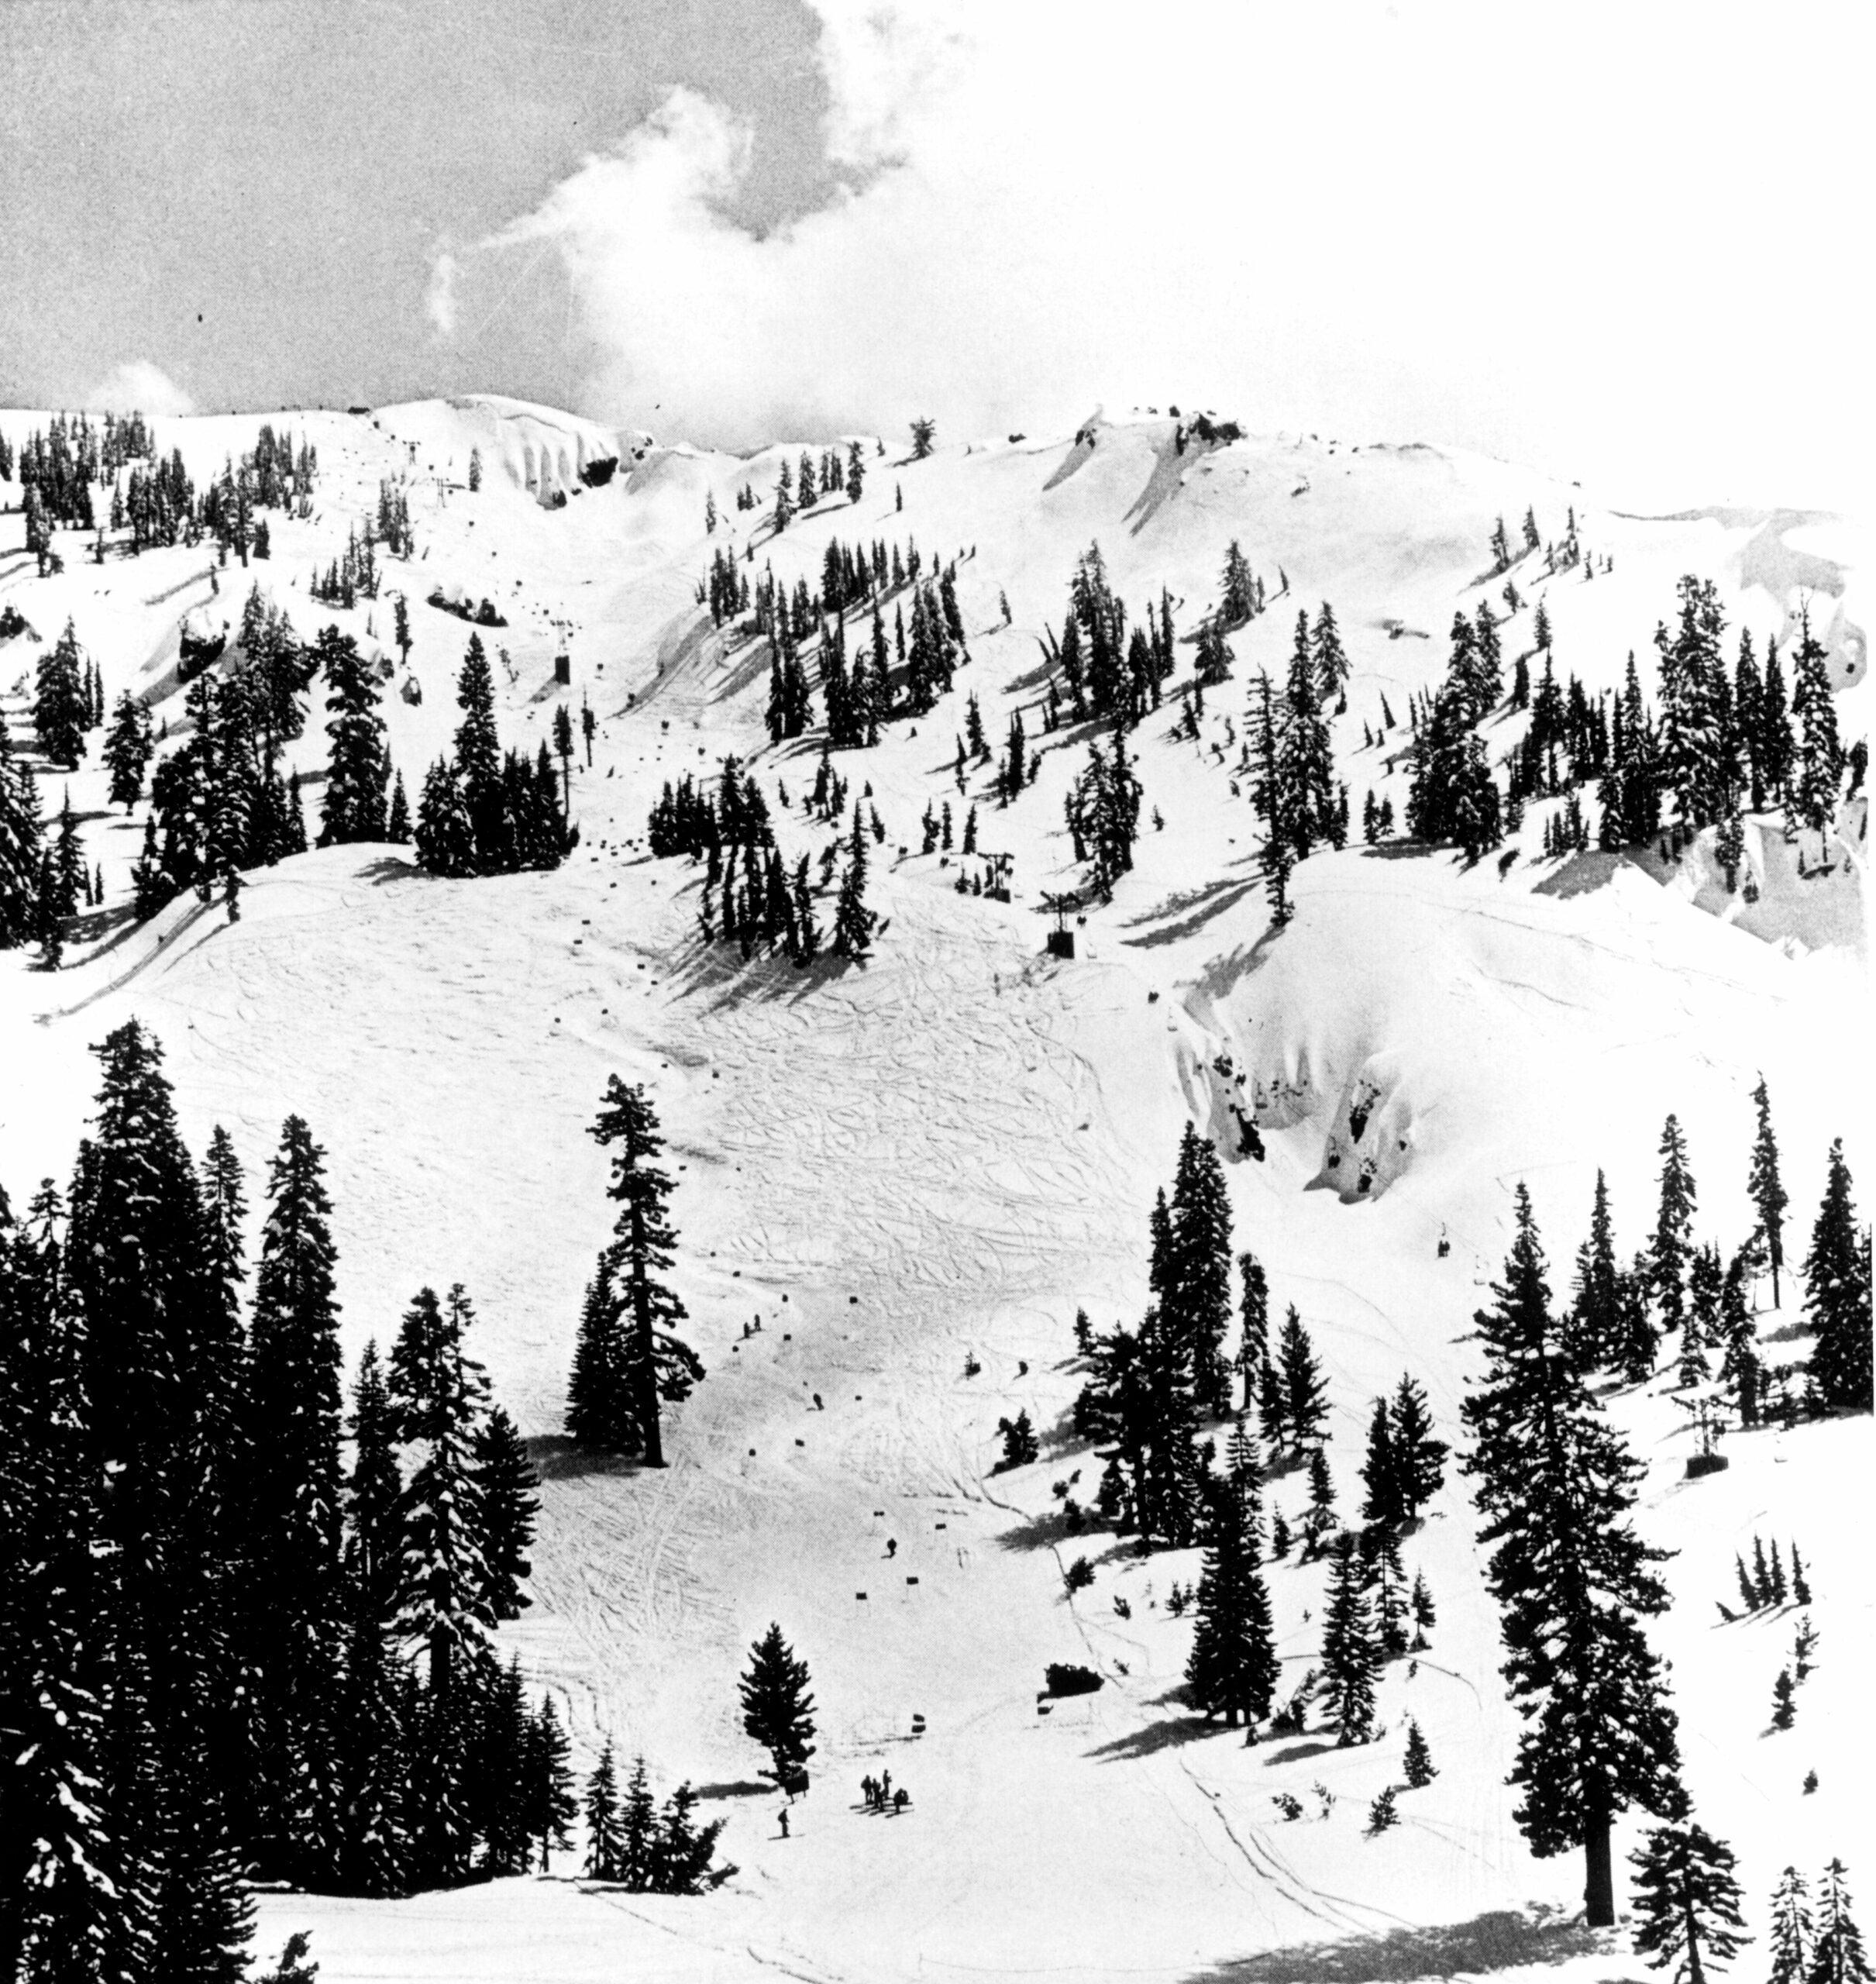 Then & Now: The Story of the Historic North Creek Ski Bowl